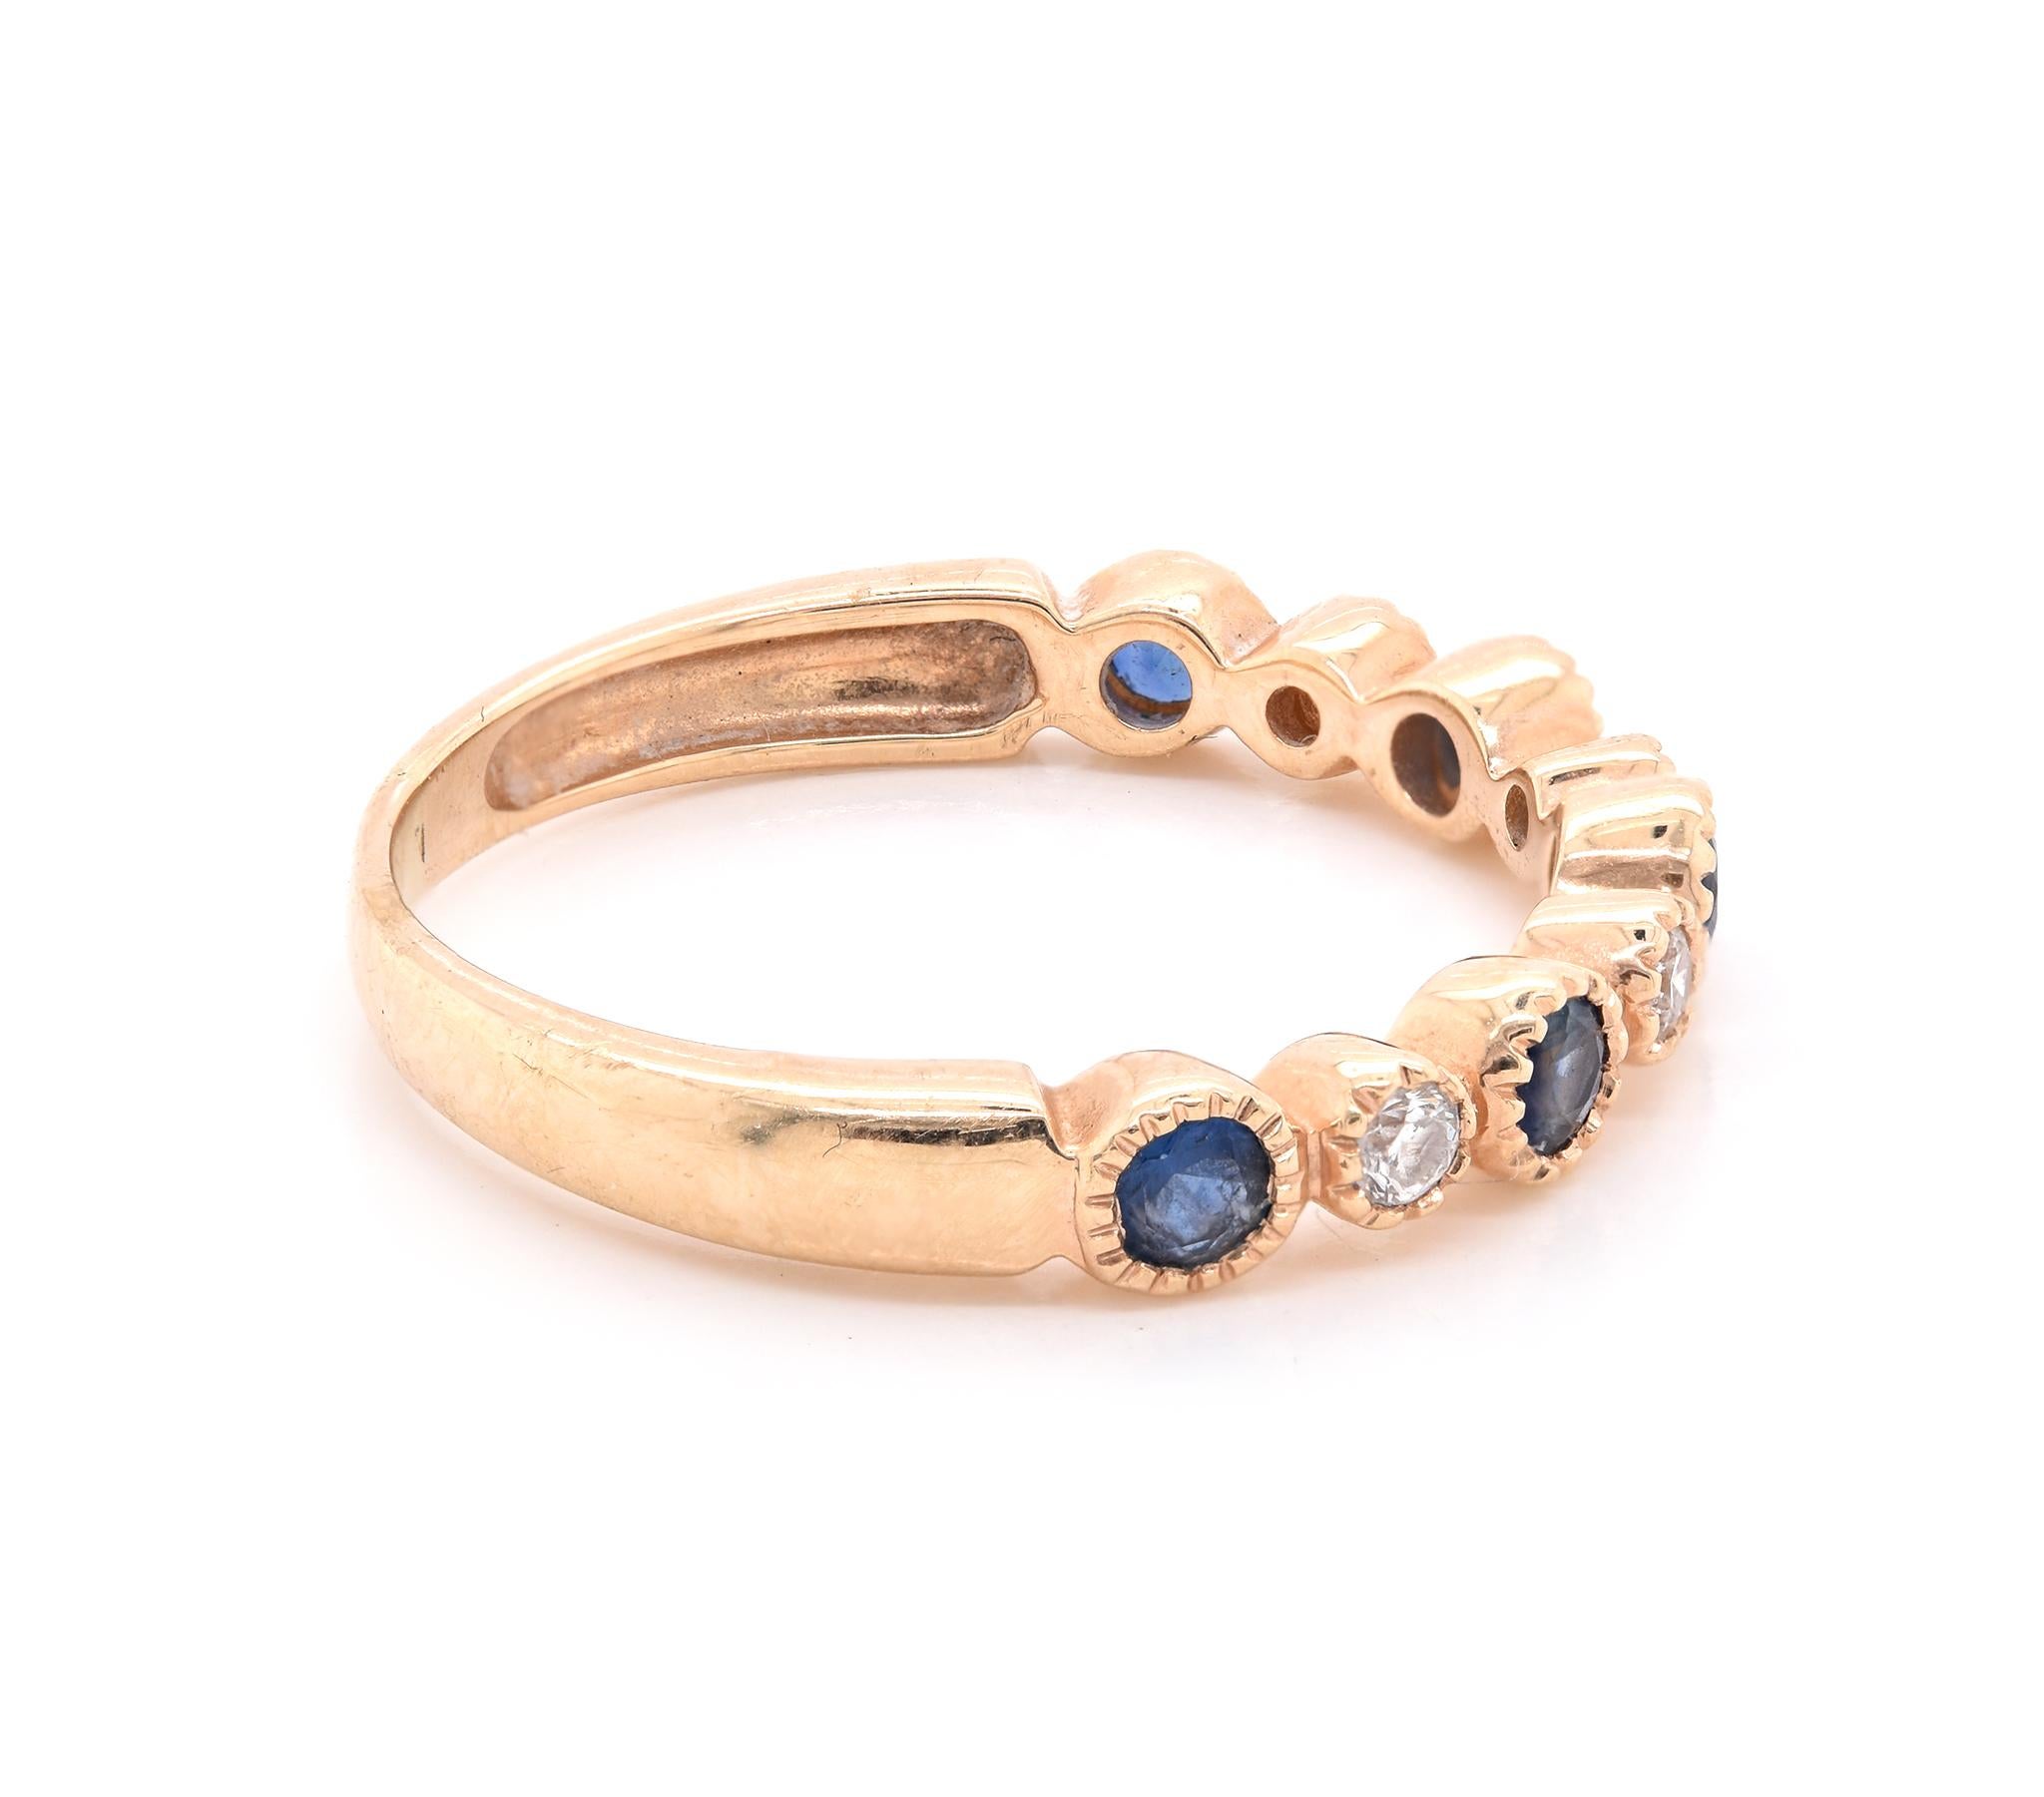 Designer: custom design
Material: 14K yellow gold
Diamonds: 4 round cut = .11cttw
Color: G
Clarity: VS1
Sapphire: 5 round cut = .45cttw
Dimensions: ring top measures 3.12mm wide
Ring Size: 5.75 (please allow two extra shipping days for sizing